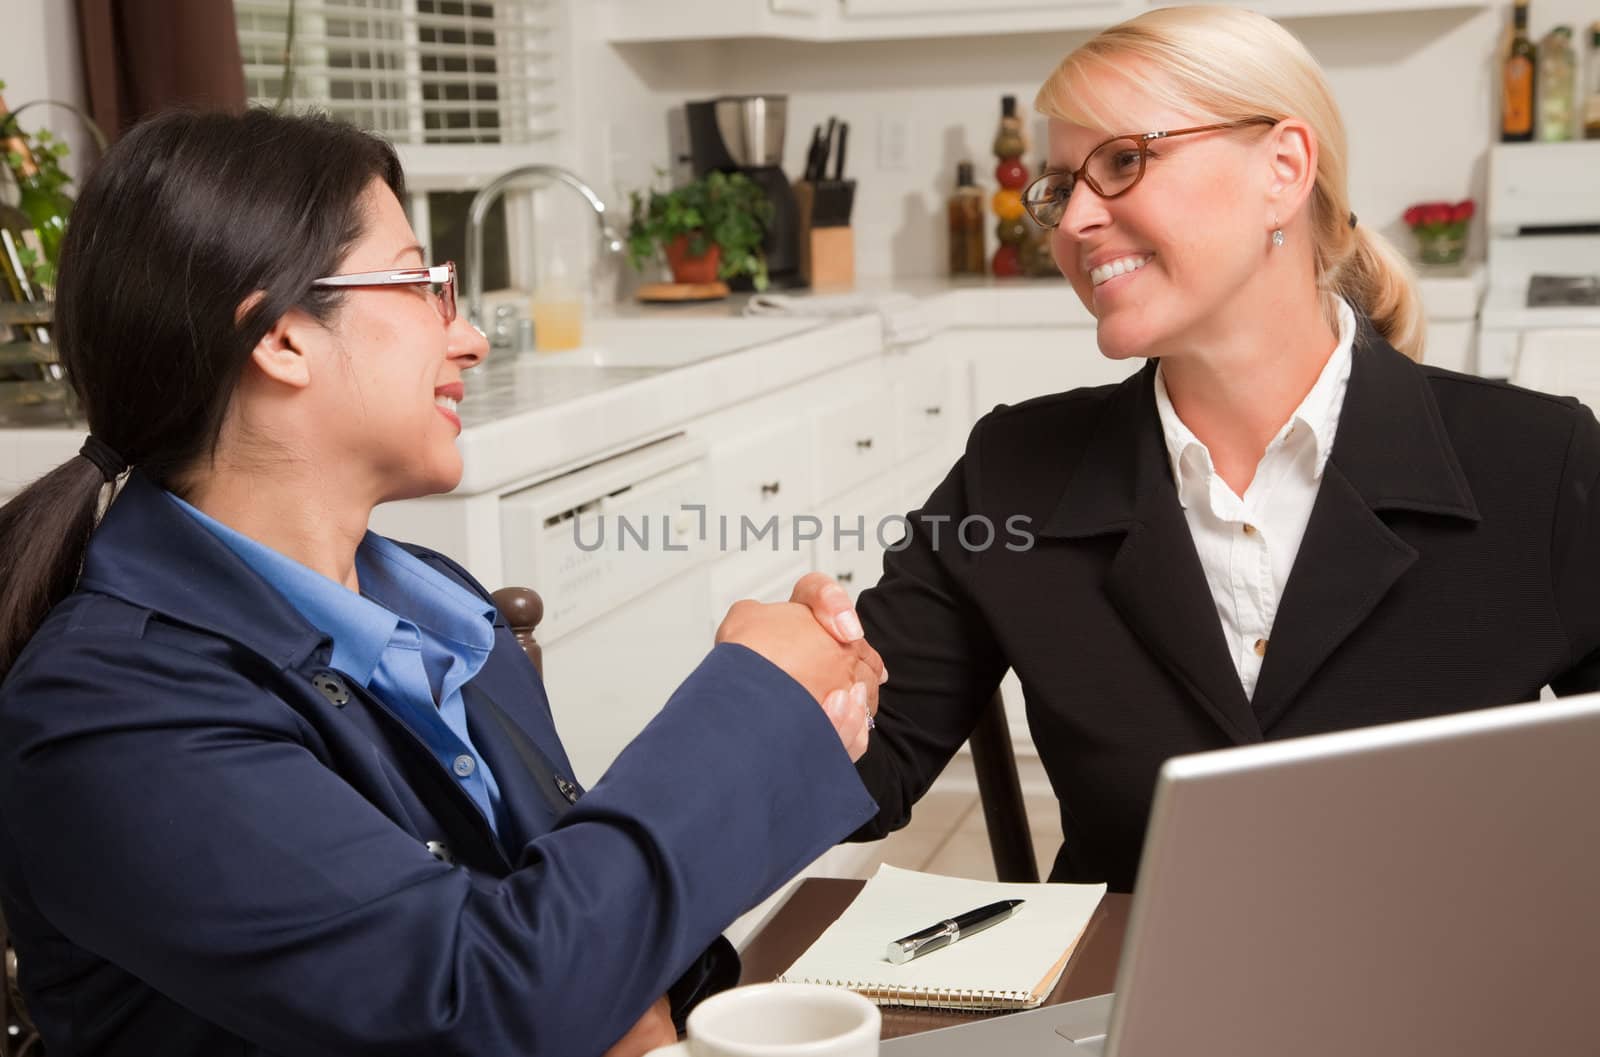 Businesswomen Shaking Hands Working on the Laptop Together in the Kitchen.